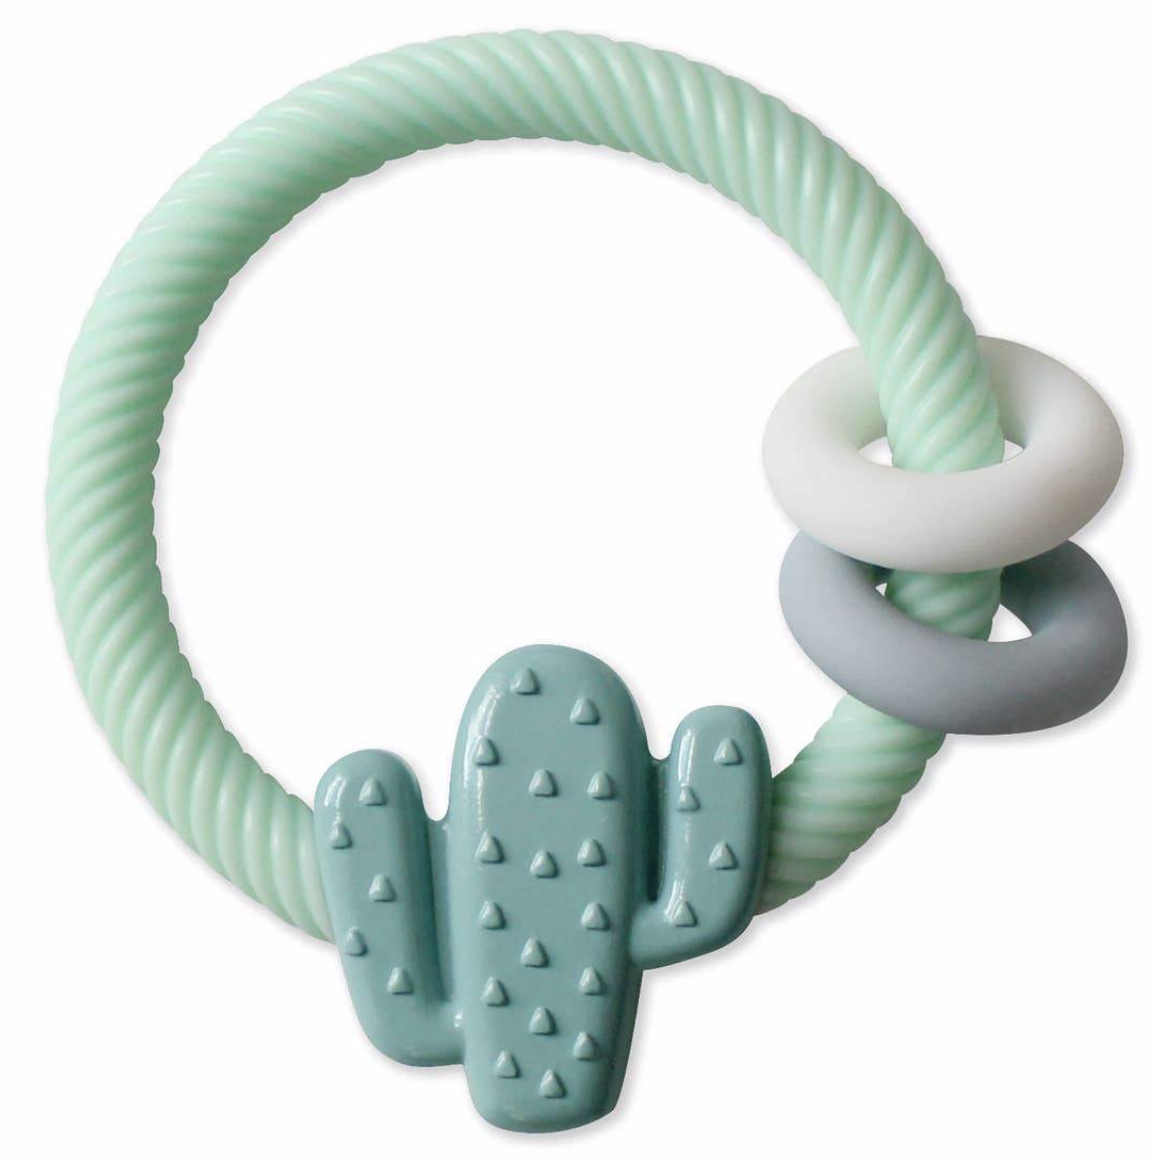 Ritzy Rattle Silicone Teether Rattles- Cactus